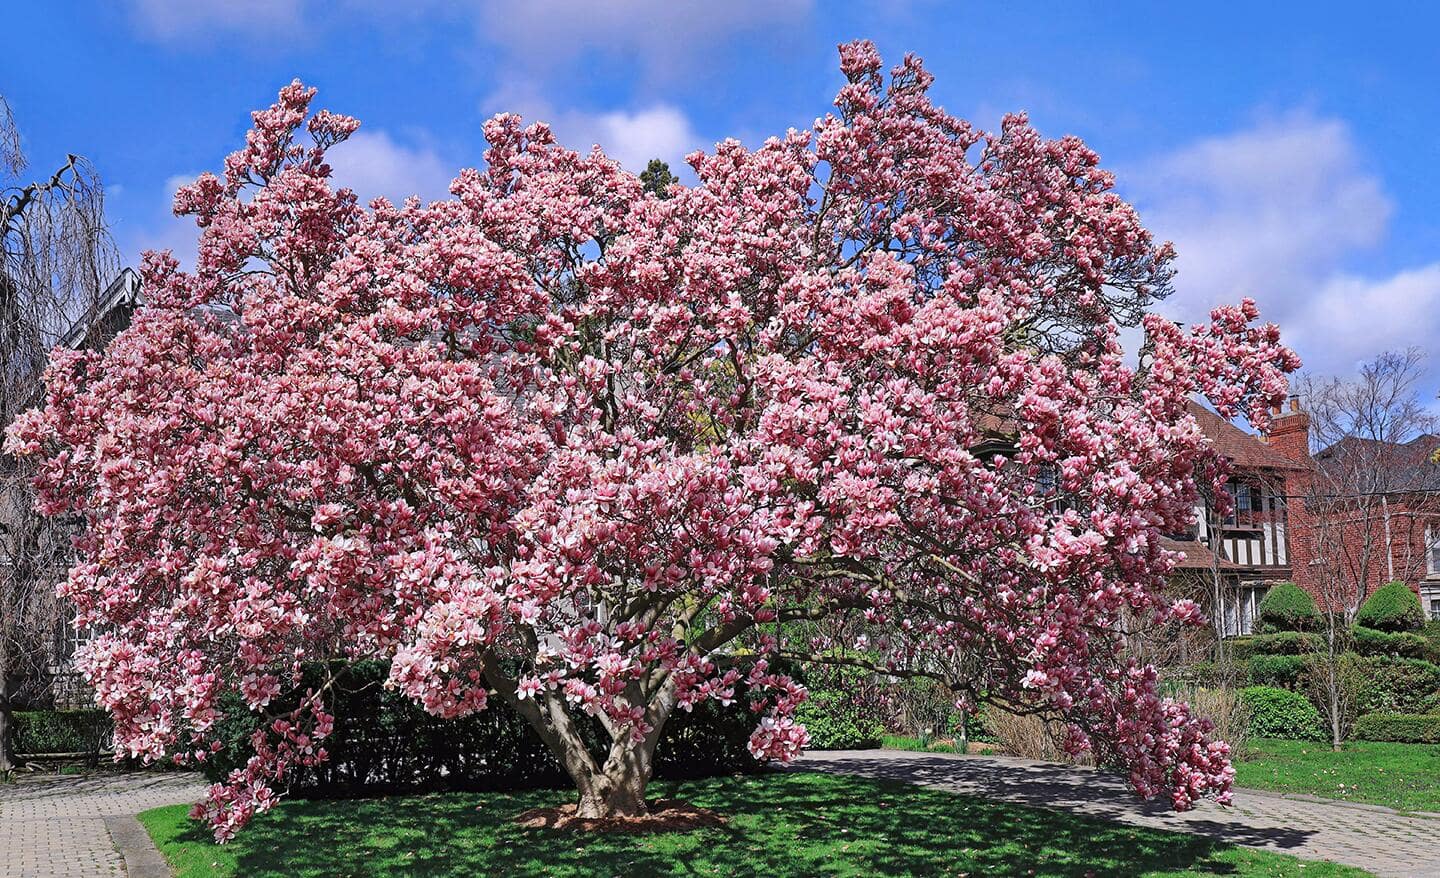 A pink saucer magnolia tree in a garden